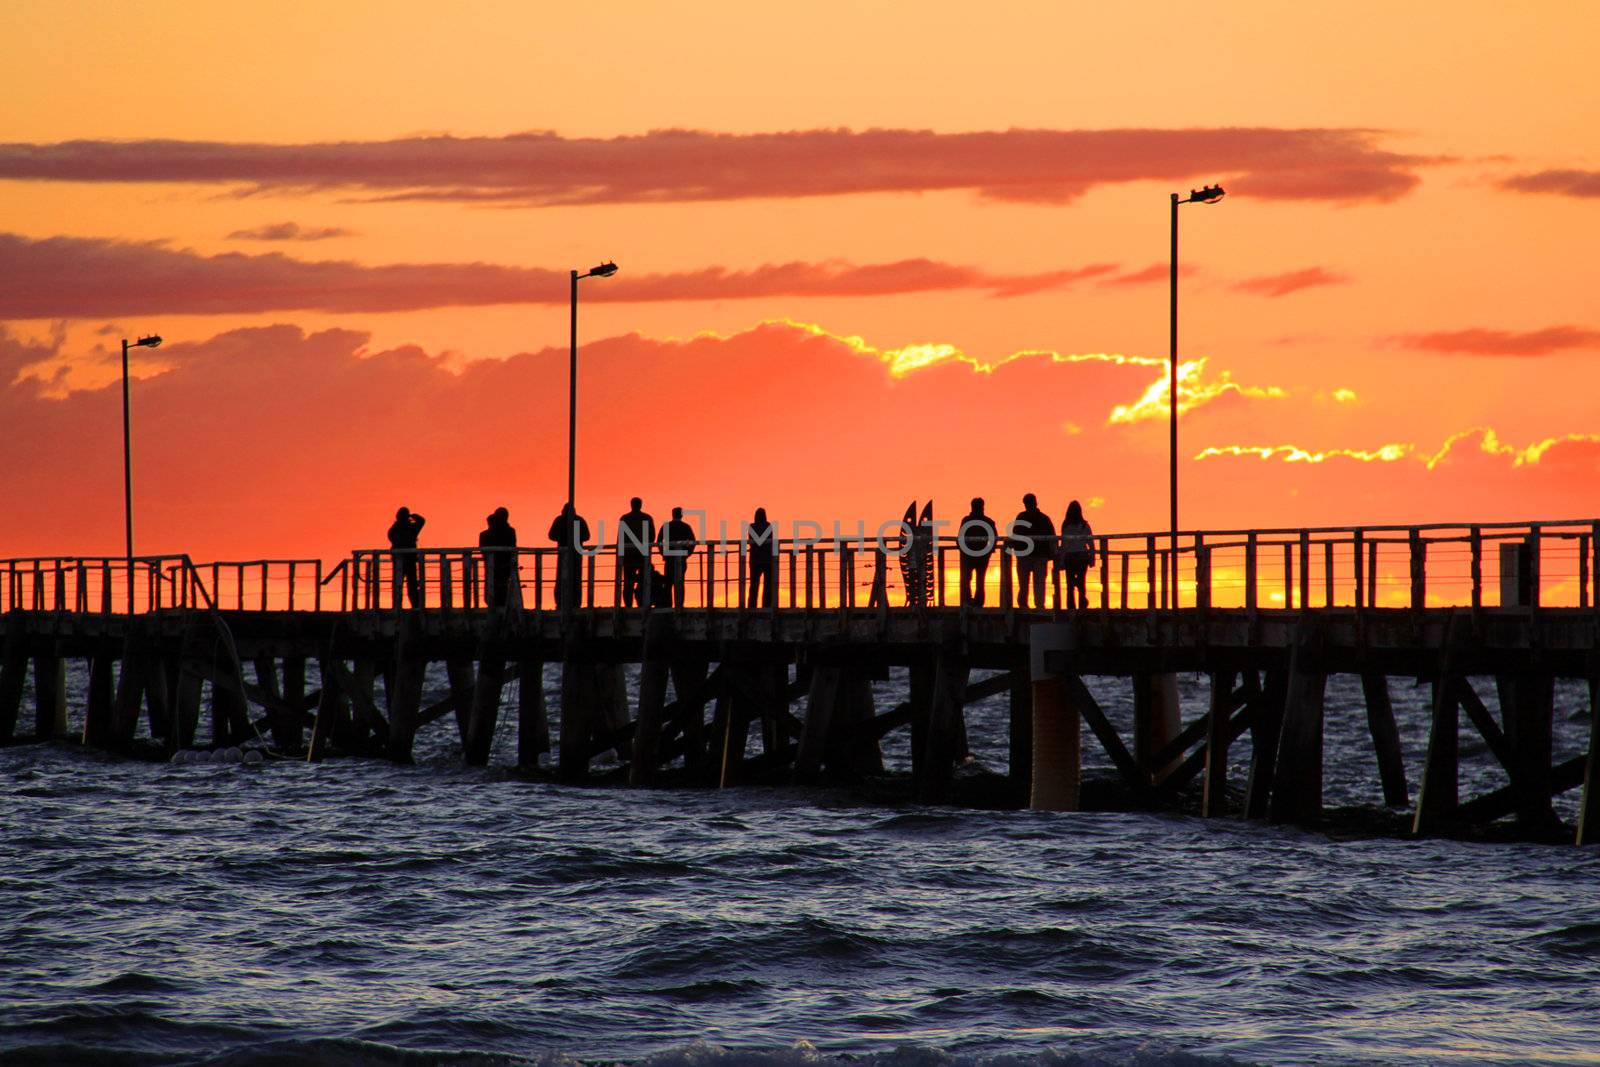 People on Jetty watching Sunset.  Semaphore Beach, Adelaide, Aus by Cloudia